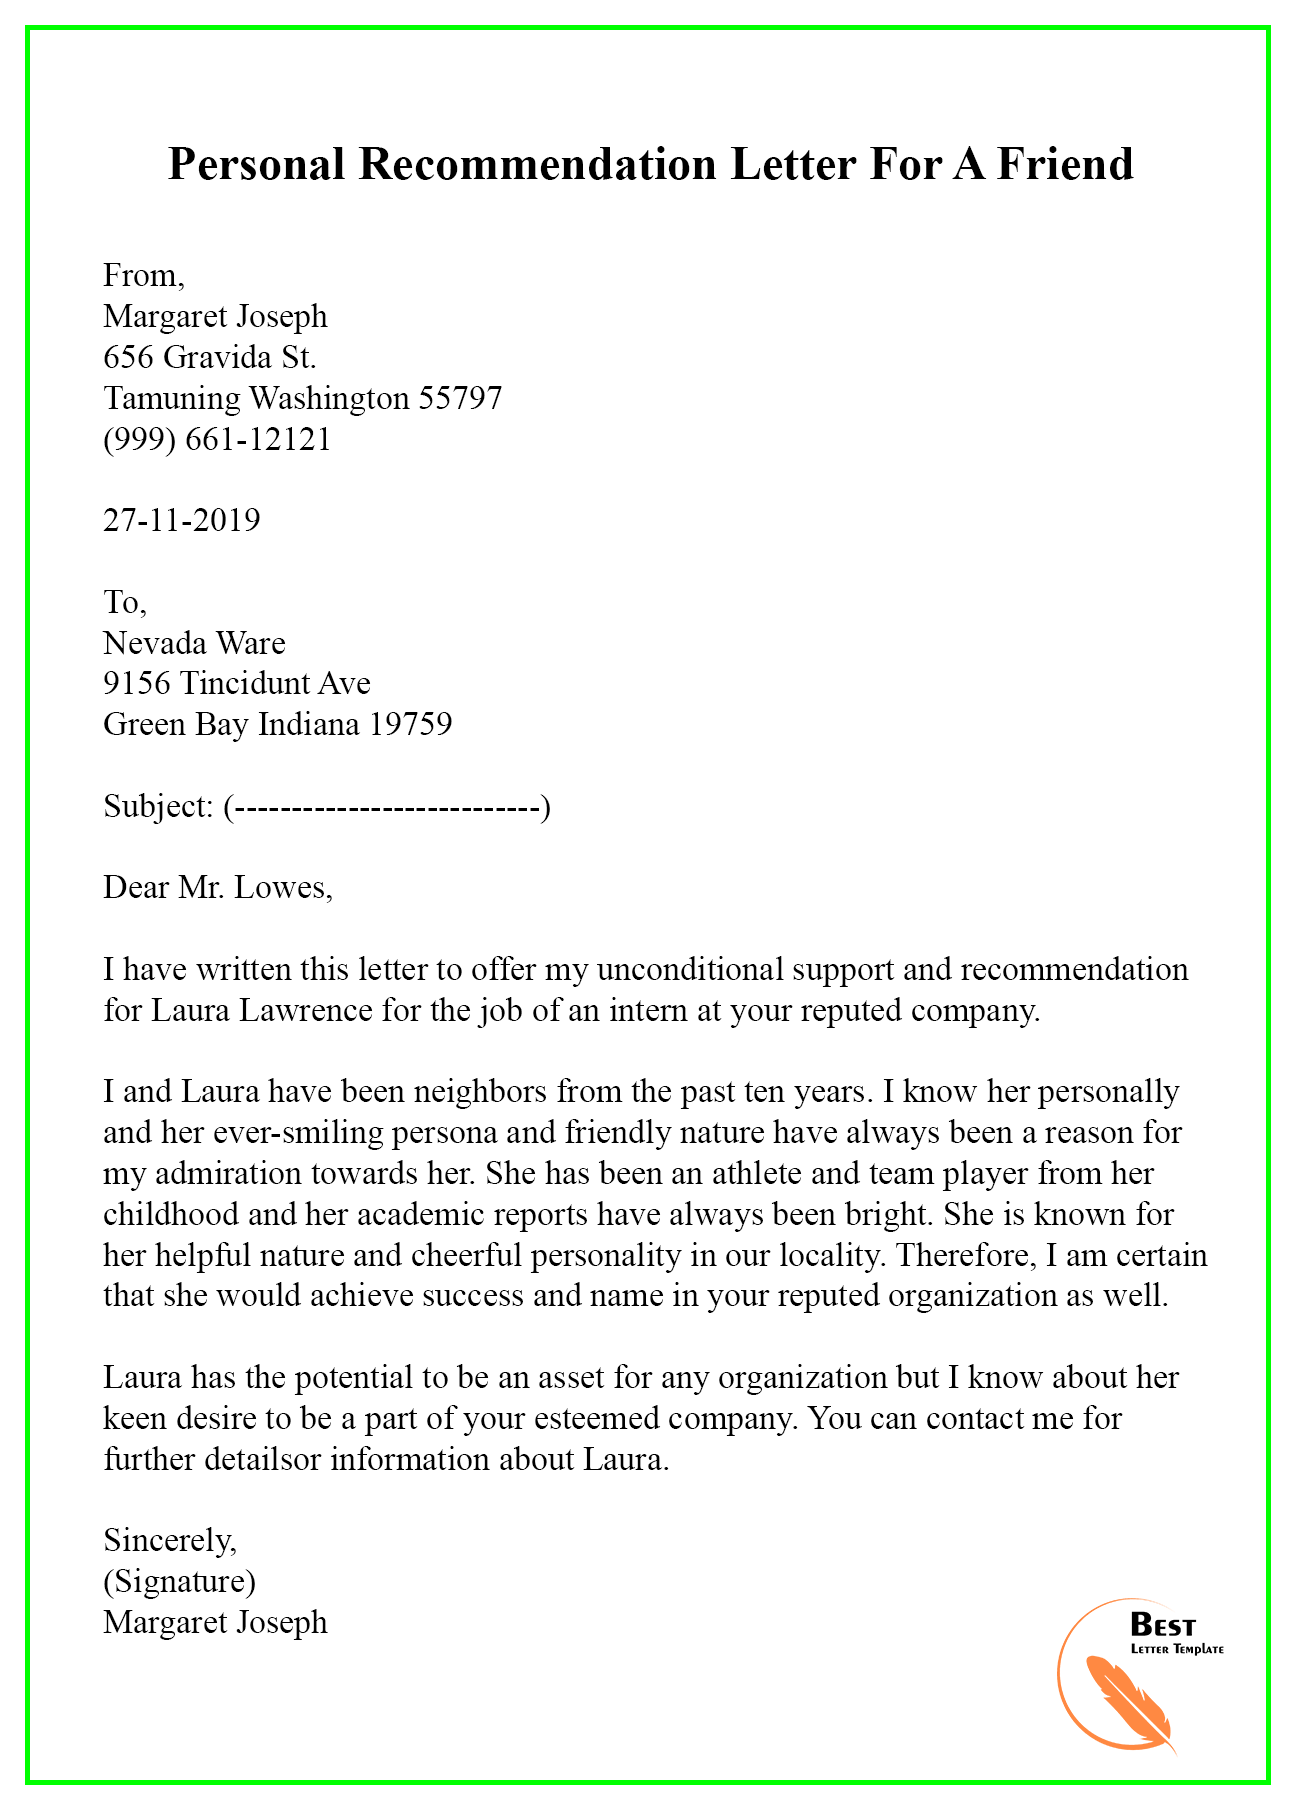 Immigration Reference Letter For Friend from bestlettertemplate.com